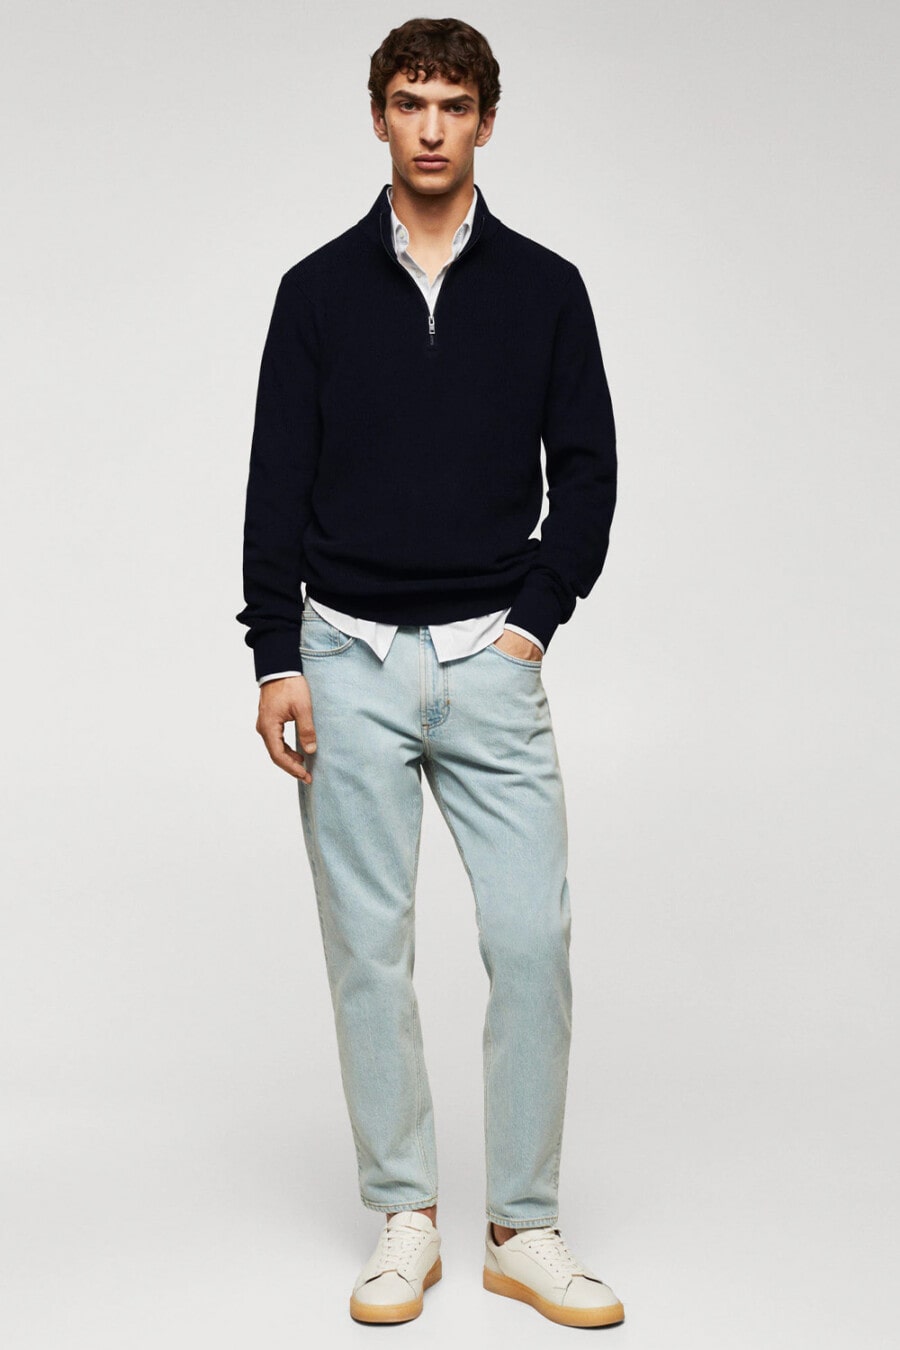 Men's light wash blue jeans, white shirt, navy half-zip sweater and white gum sole sneakers outfit